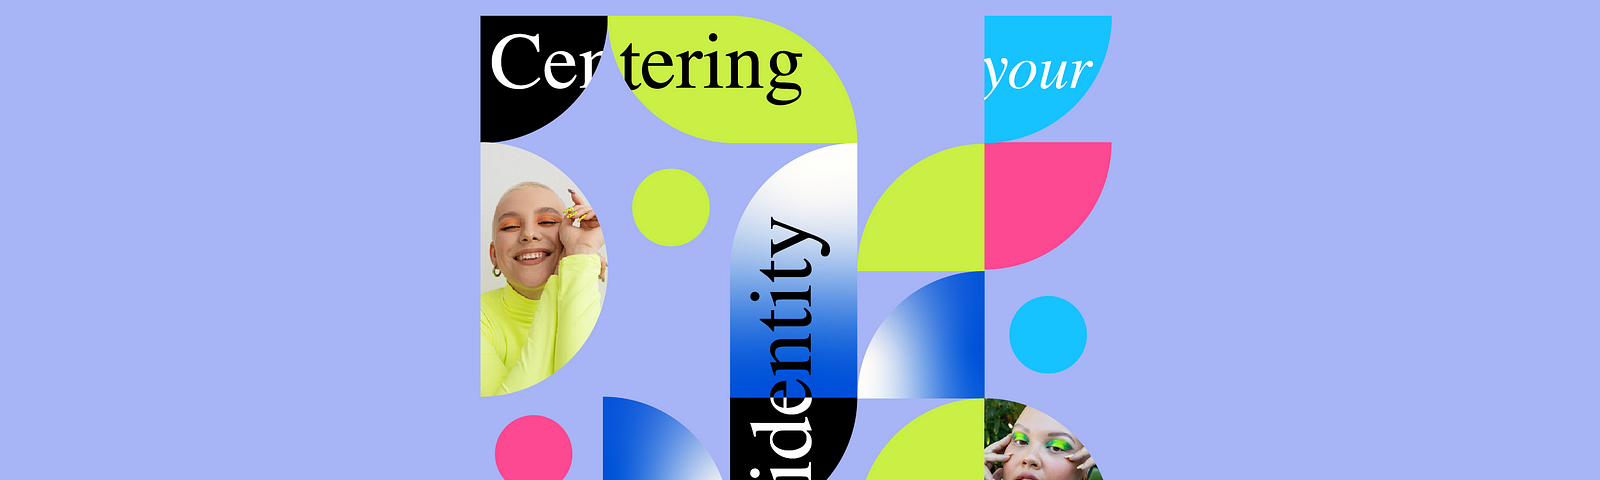 A colorful, abstract graphic with the words, “centering, your, identity, find, and act” and the faces of three individuals among green, blue, pink, and black shapes on a purple background.